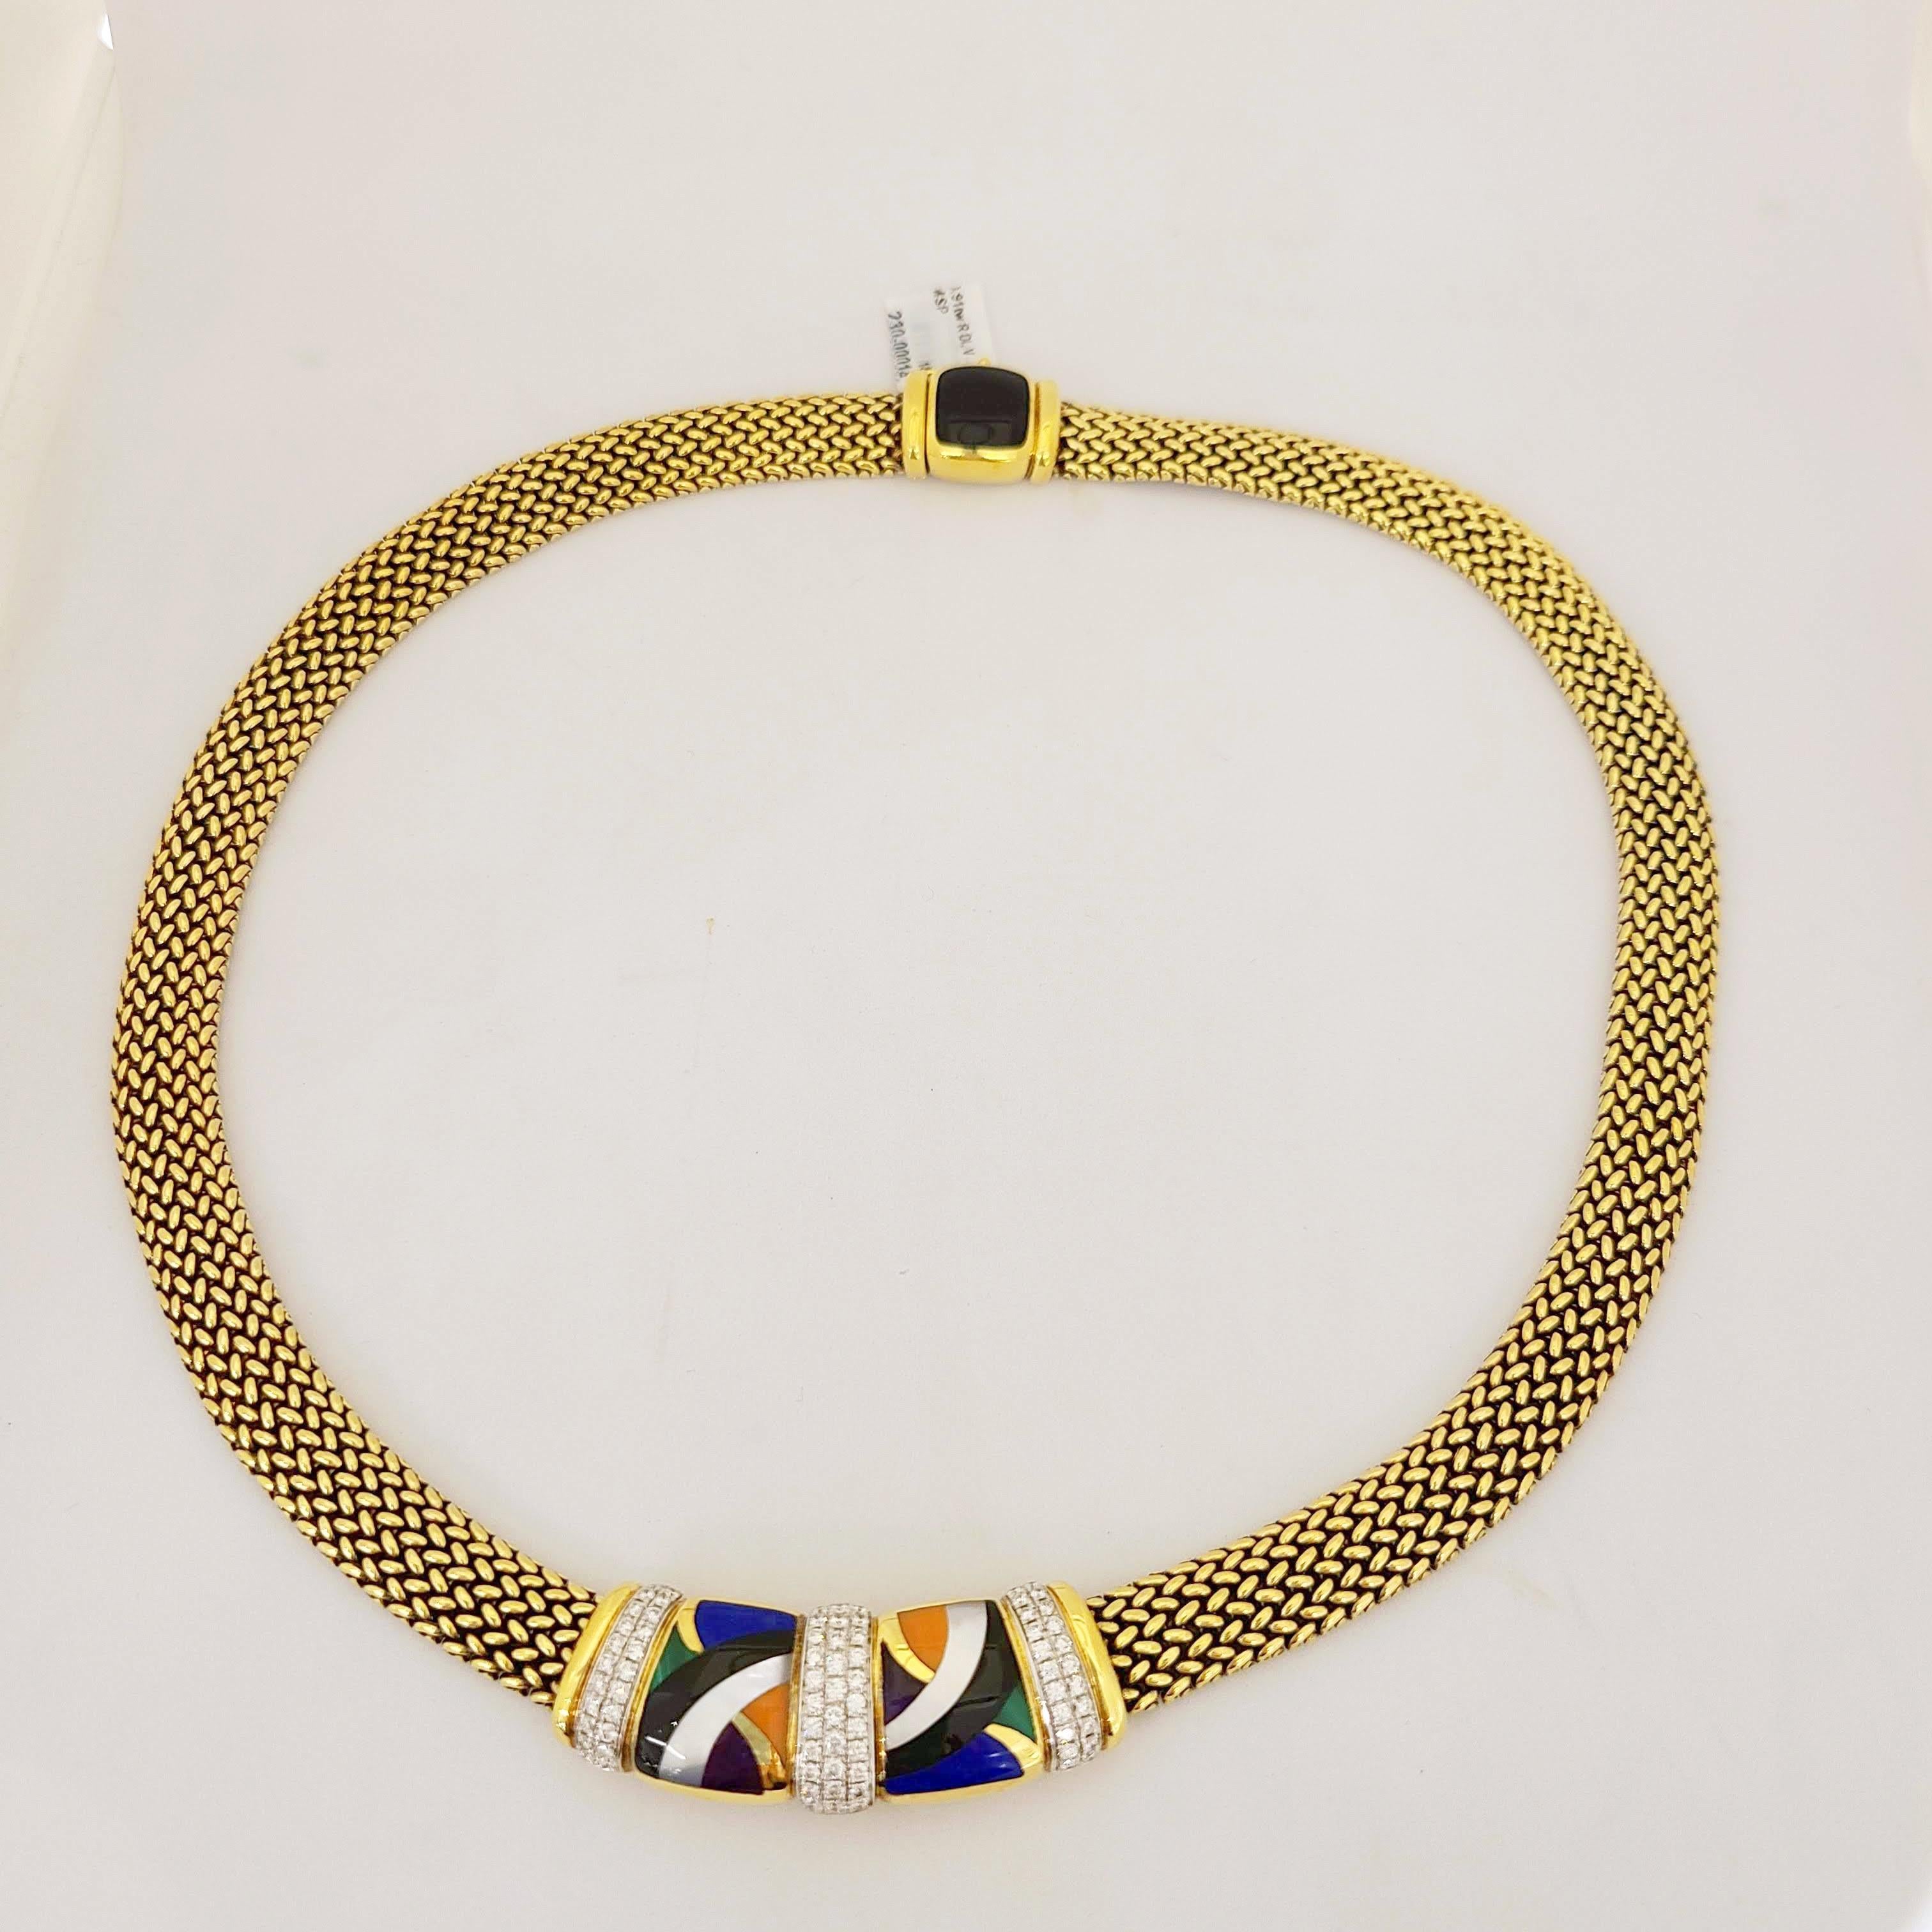 Asch Grosbardt 18 Karat Yellow Gold Necklace with Diamonds and Inlaid Stones In New Condition For Sale In New York, NY